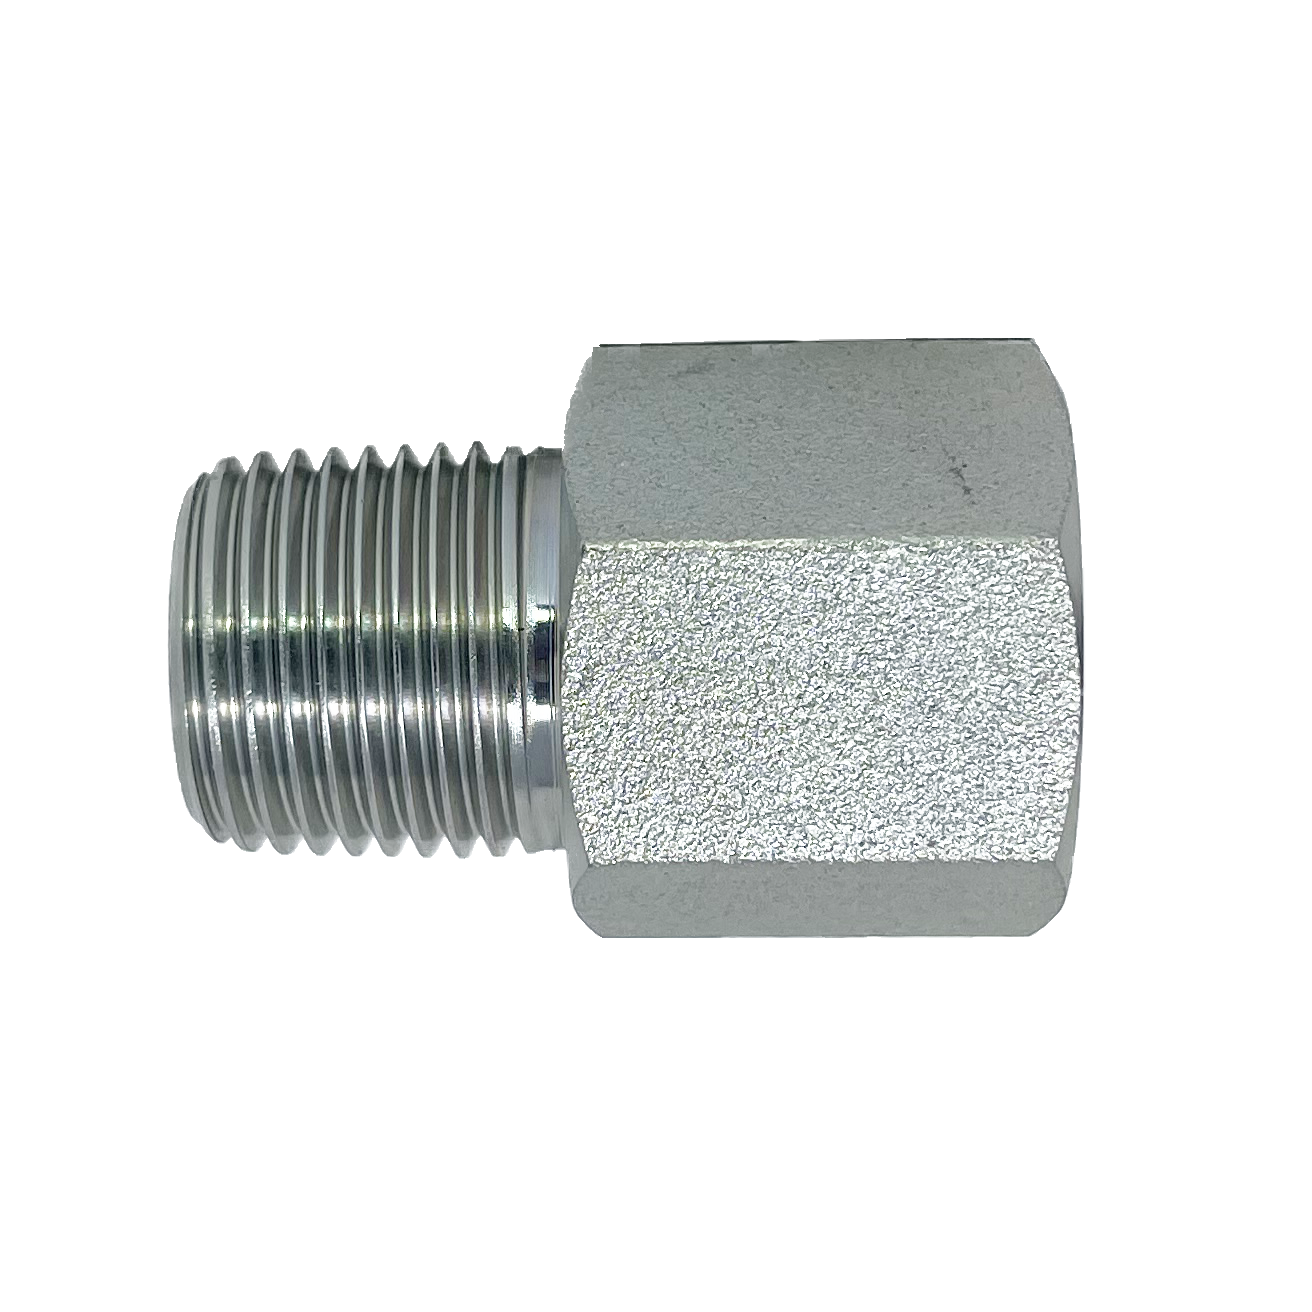 9032-08-08 : Adaptall Straight Adapter, Male 0.5 (1/2") BSPT x Female 0.5 (1/2") BSPP, Carbon Steel